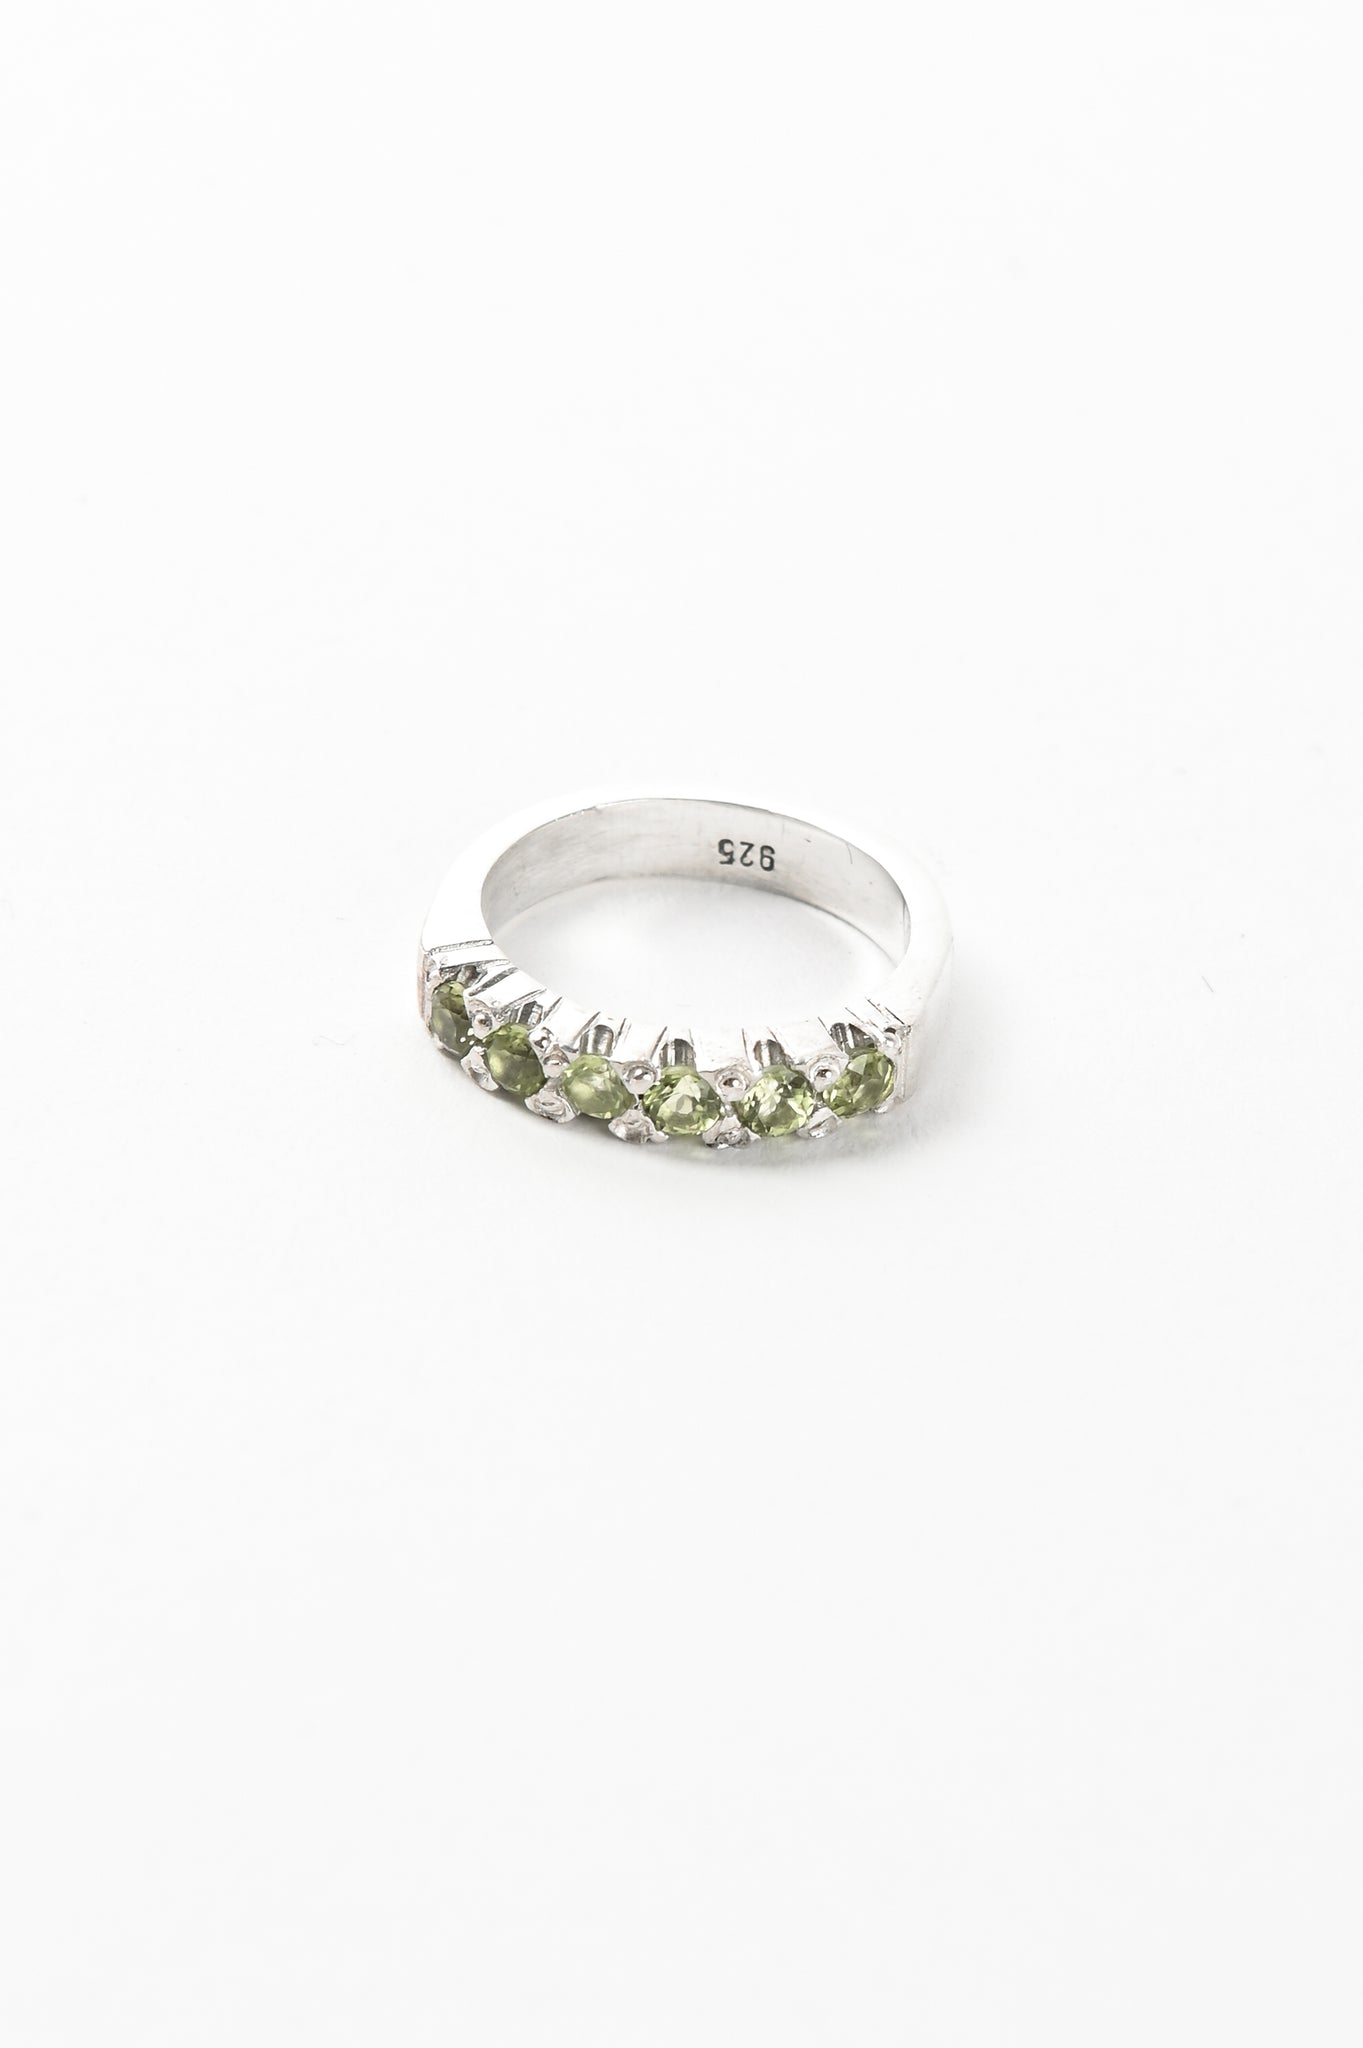 Oliver Thomas 'Ever' Ring With Peridot